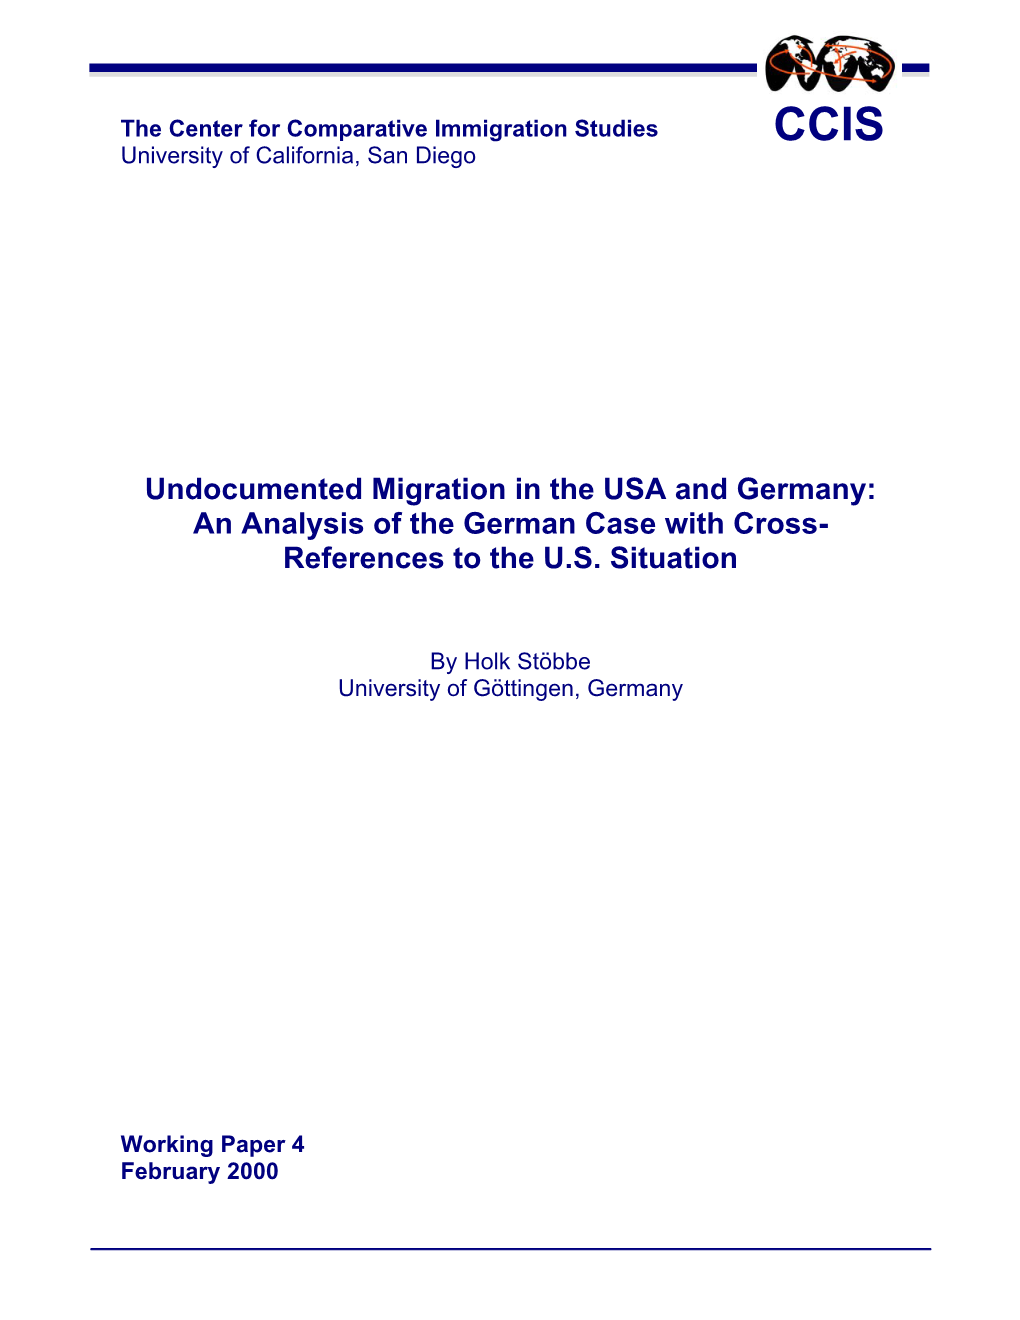 Undocumented Migration in the USA and Germany: an Analysis of the German Case with Cross- References to the U.S